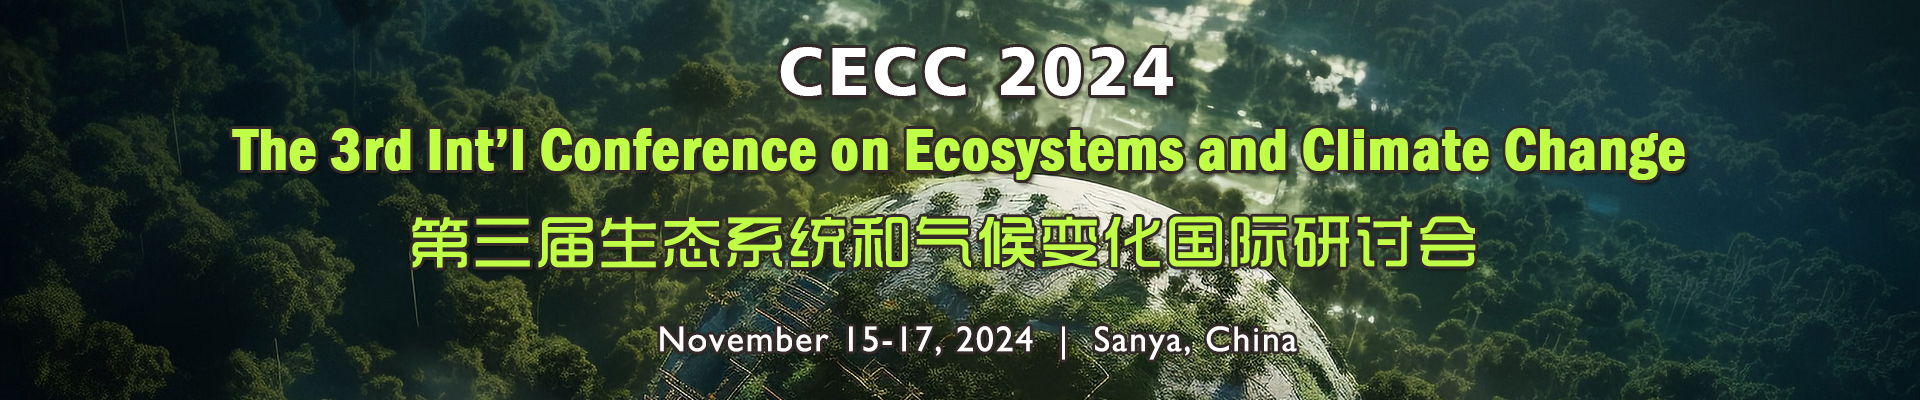 The 3rd Int'l Conference on Ecosystems and Climate Change (CECC 2024), Sanya, Hainan, China